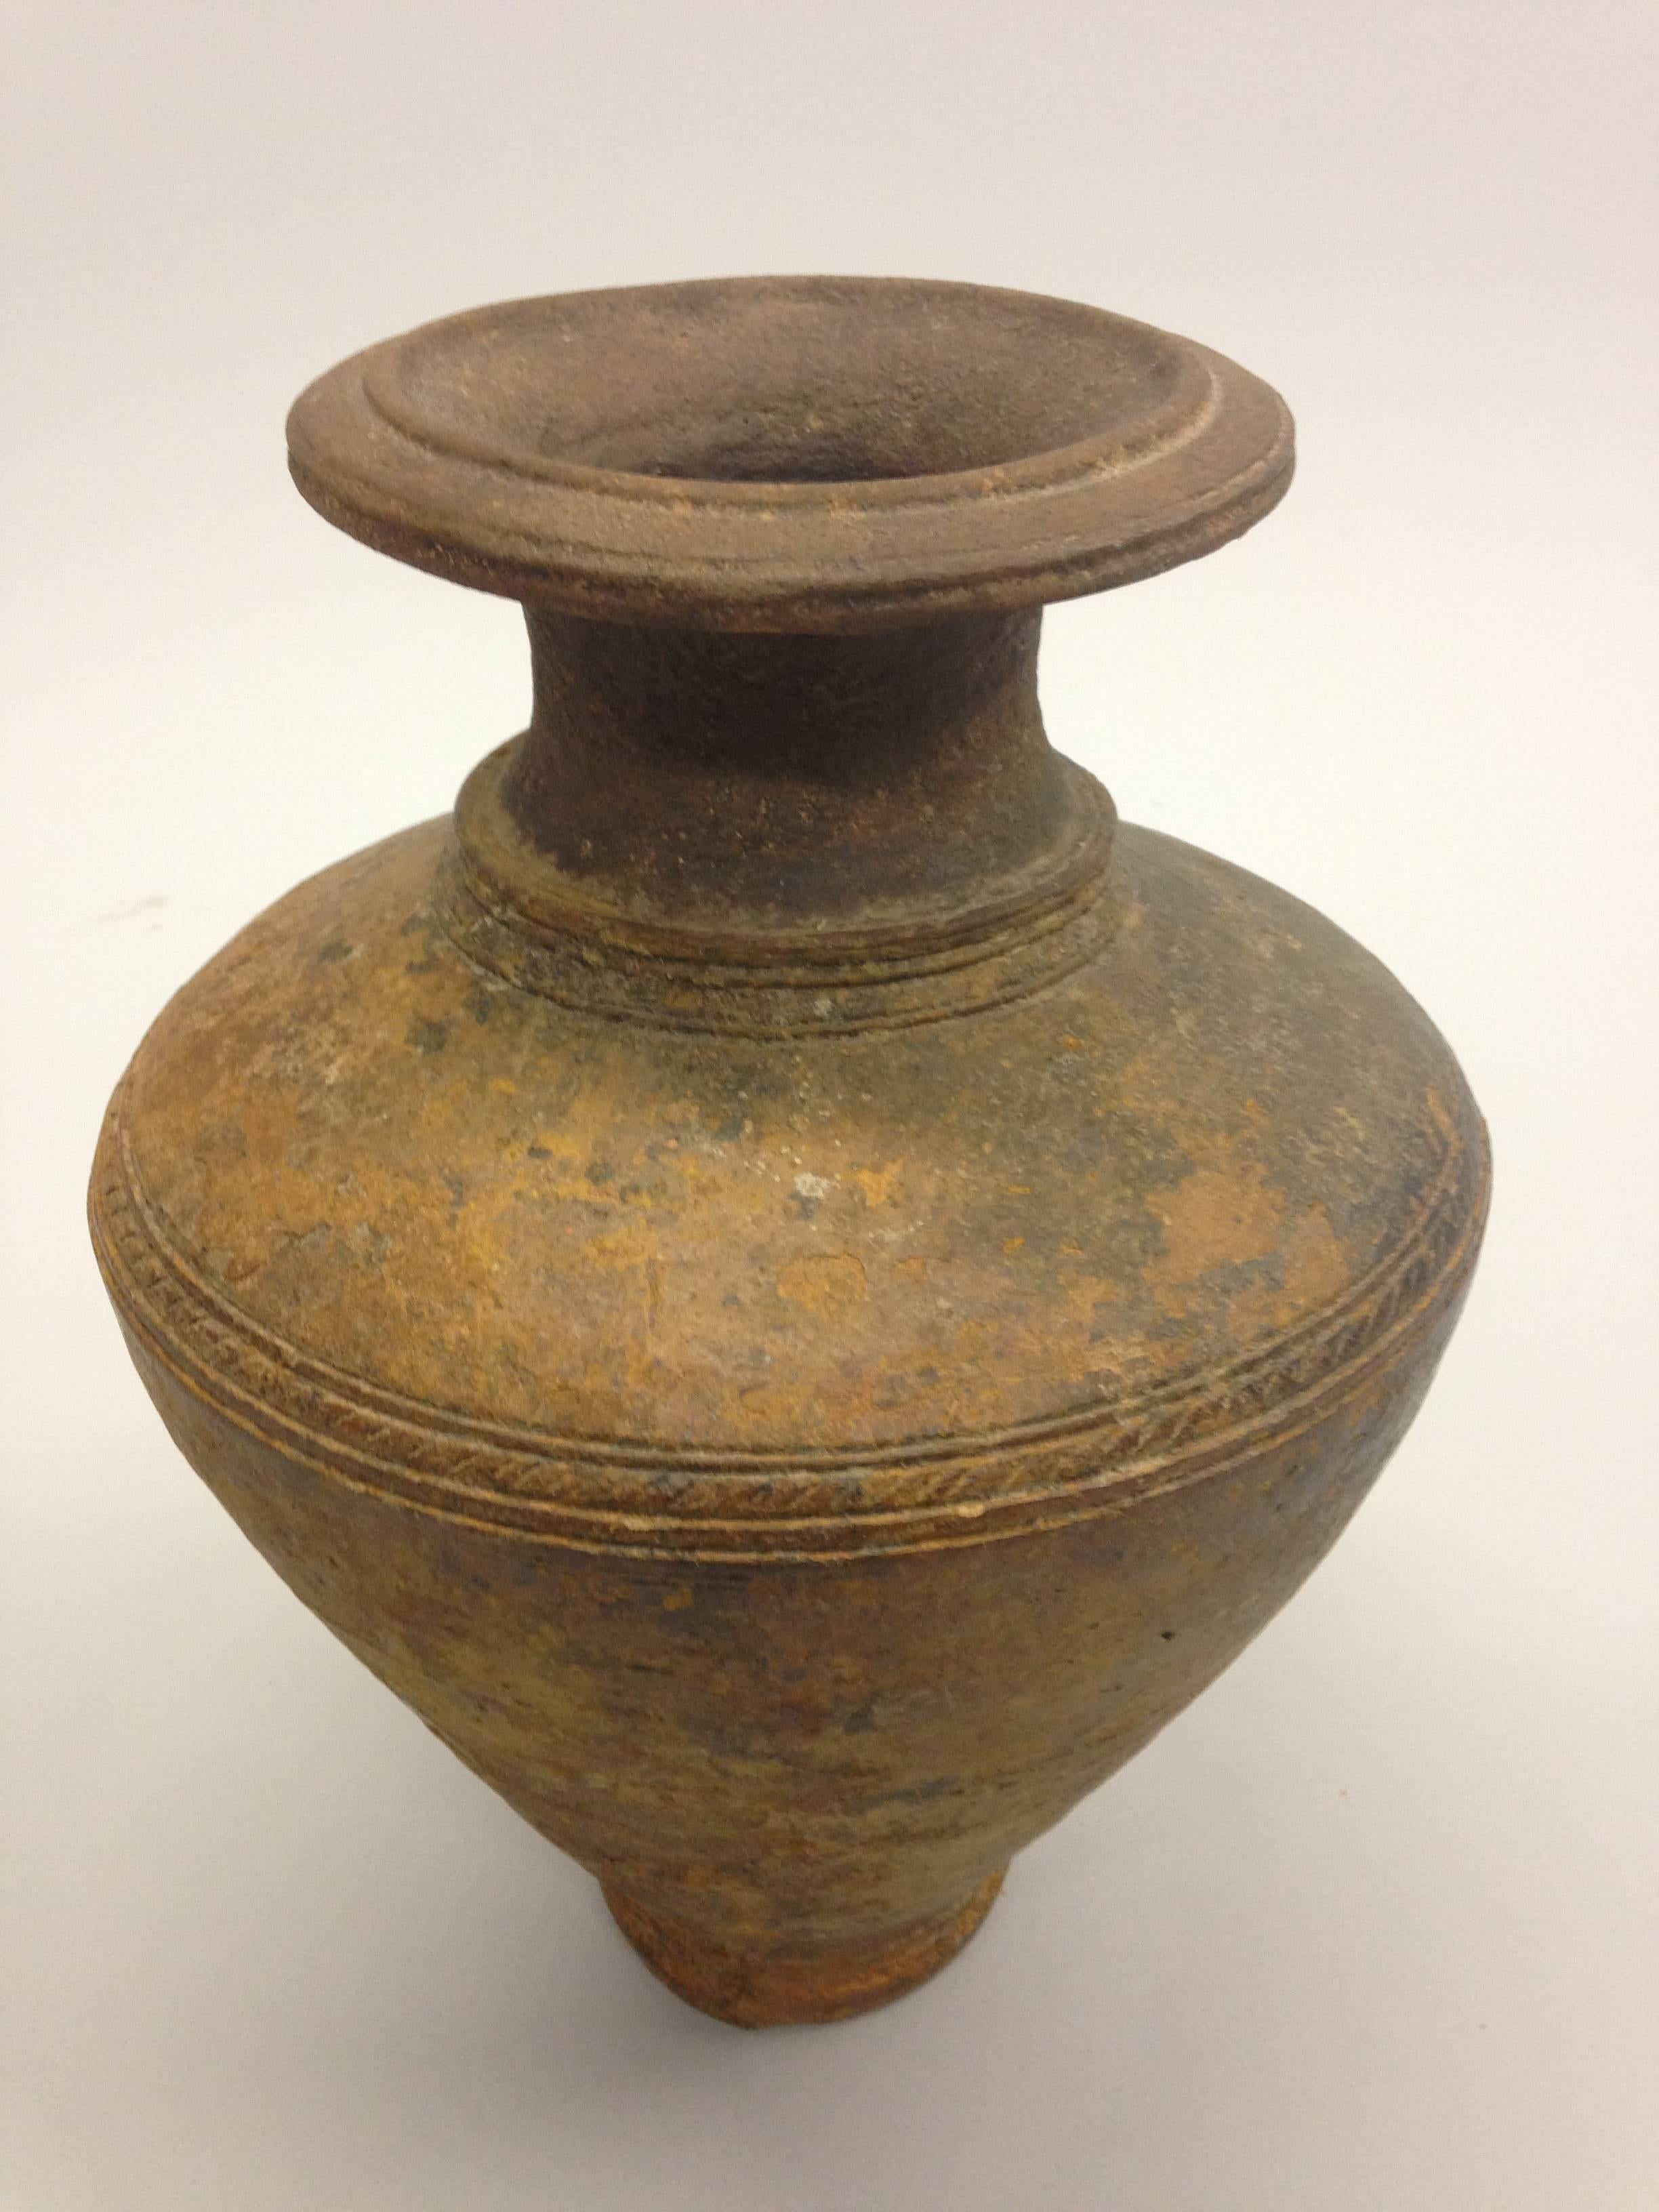 A Khmer urn or vase with a sober, classic form from the Khmer region of ancient Cambodia. Classic form, sober pieces such as these compliment sober, modern or Mid-Century Modern settings very well. 

References: Ancient Art, Sculpture and Objects,